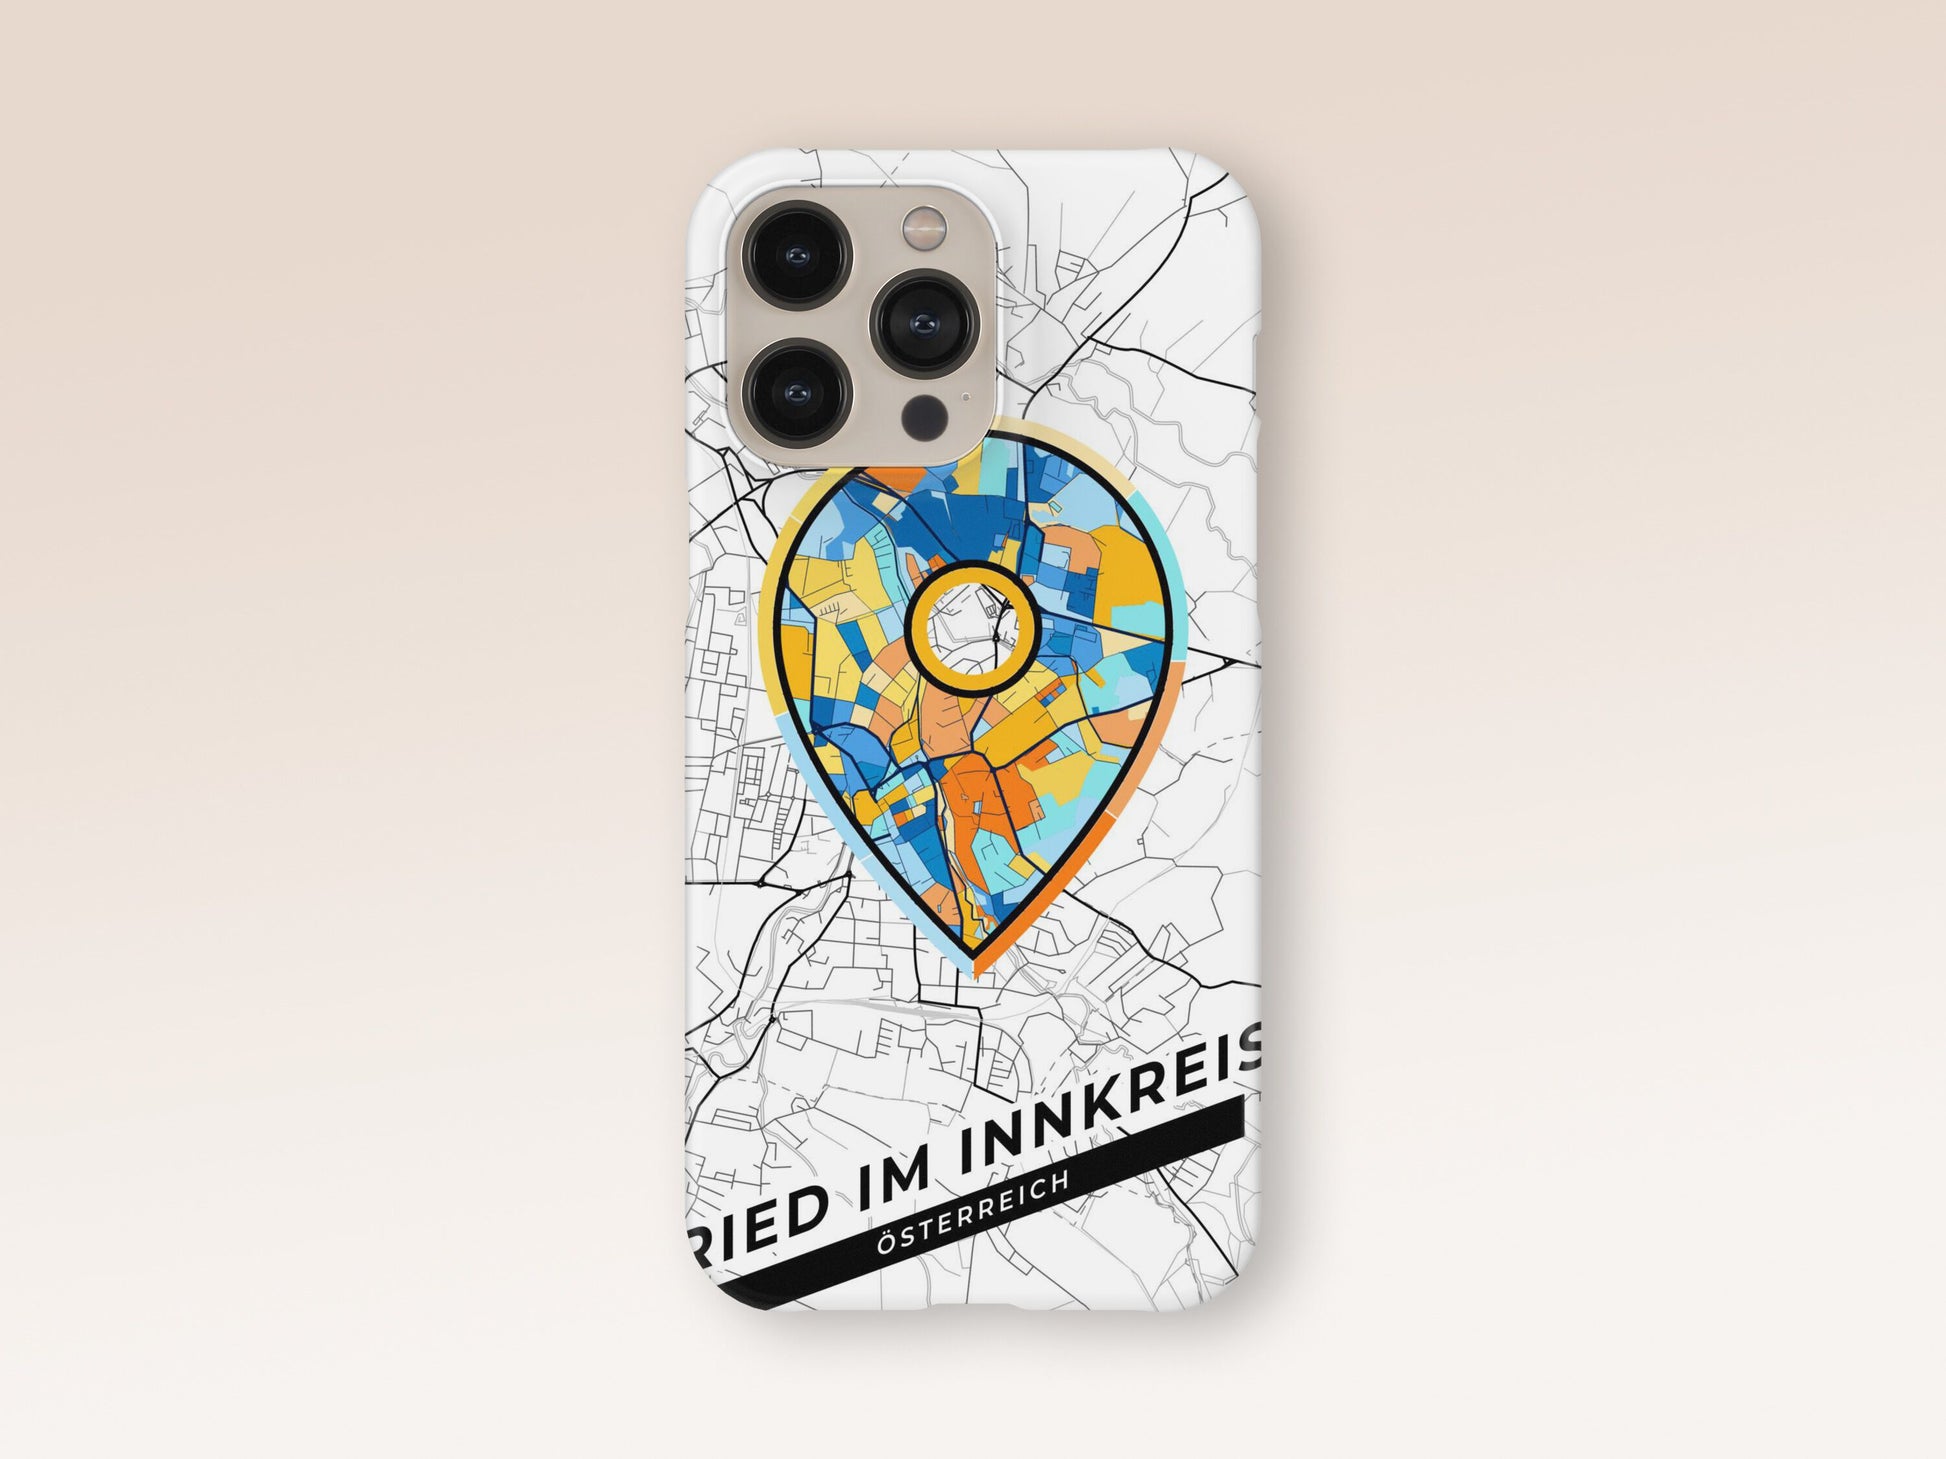 Ried Im Innkreis Österreich slim phone case with colorful icon. Birthday, wedding or housewarming gift. Couple match cases. 1